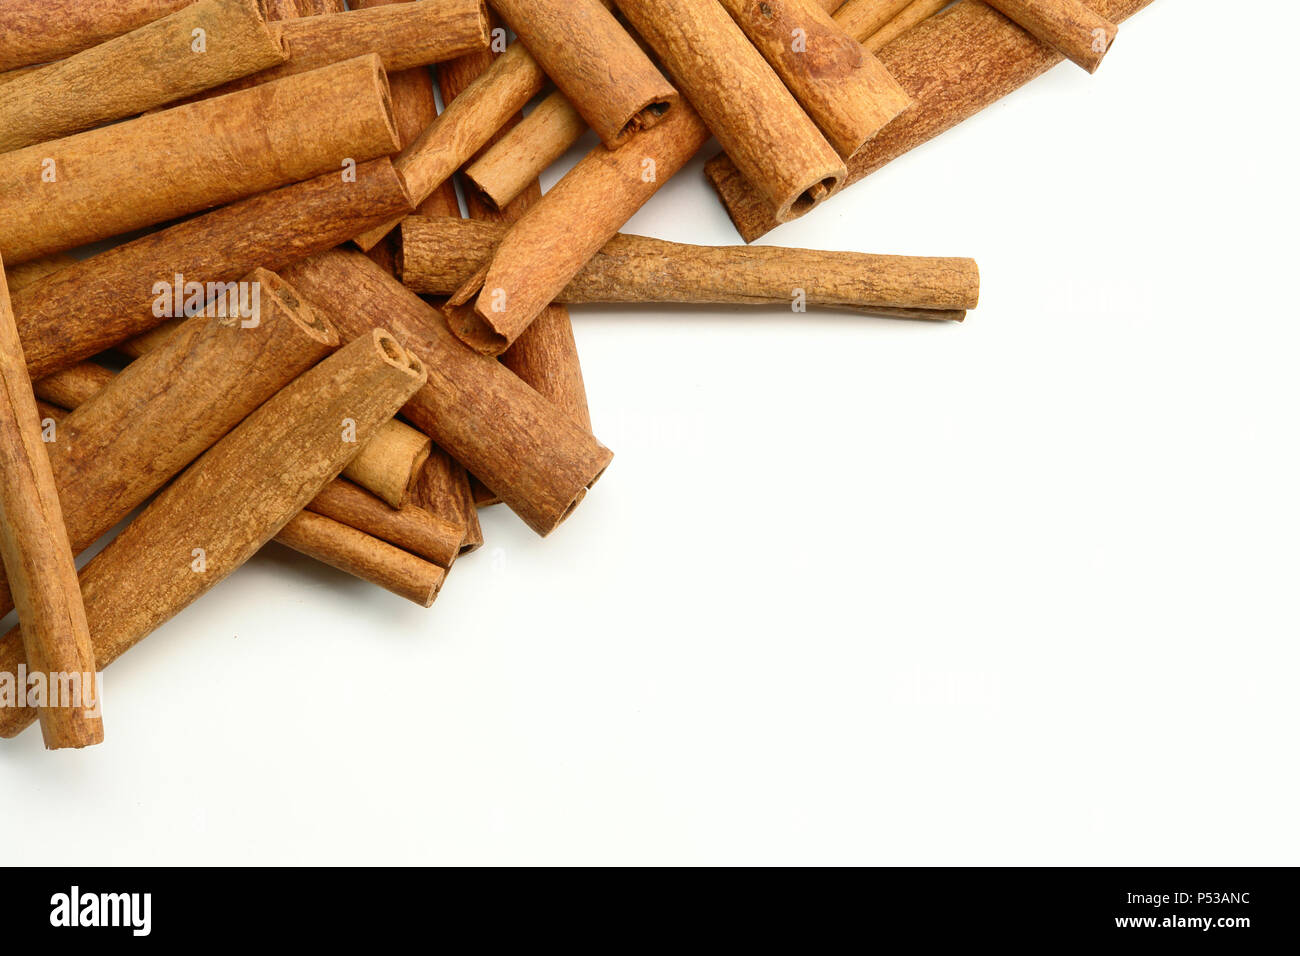 Stack of Cinnamon Sticks (Isolated on white background) Stock Photo